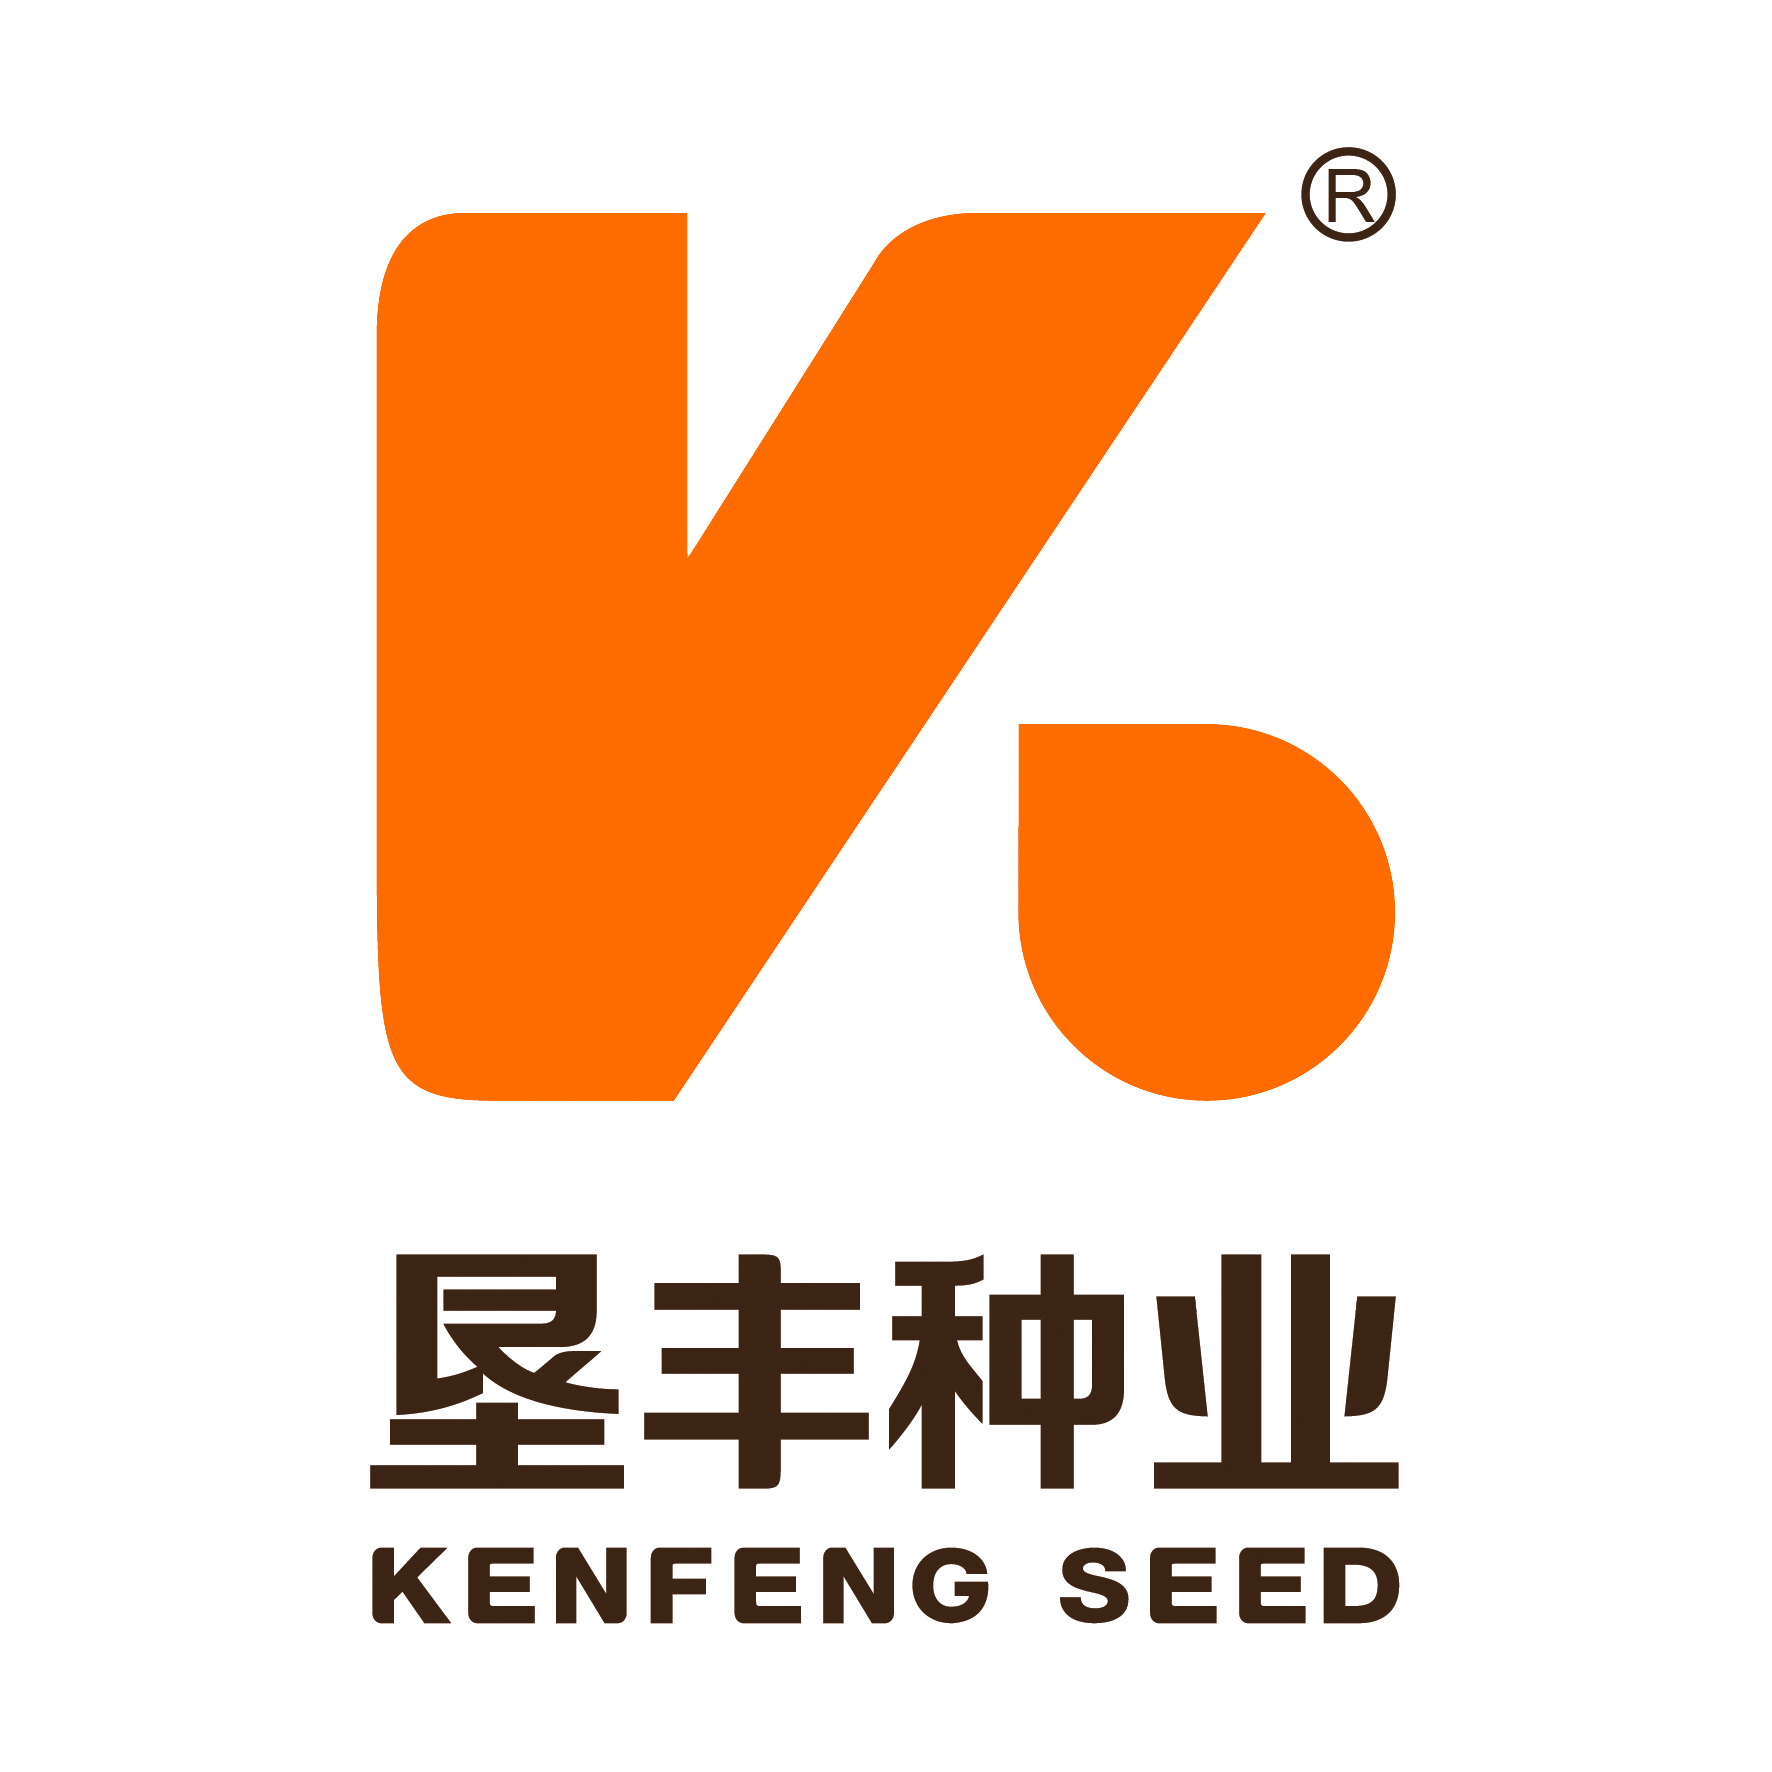 KENFENG SEED